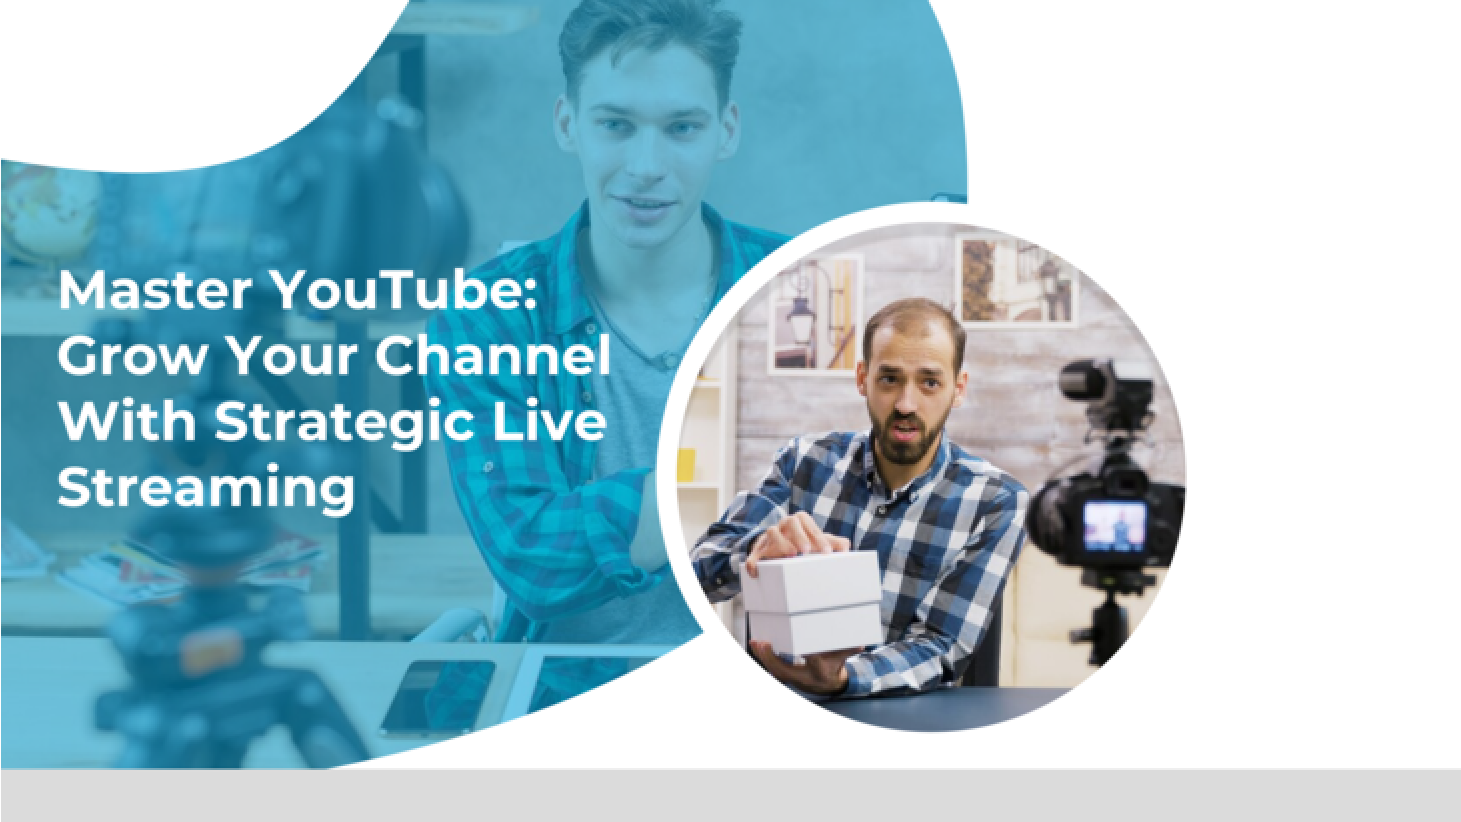 Master YouTube: Grow Your Channel With Strategic Live Streaming